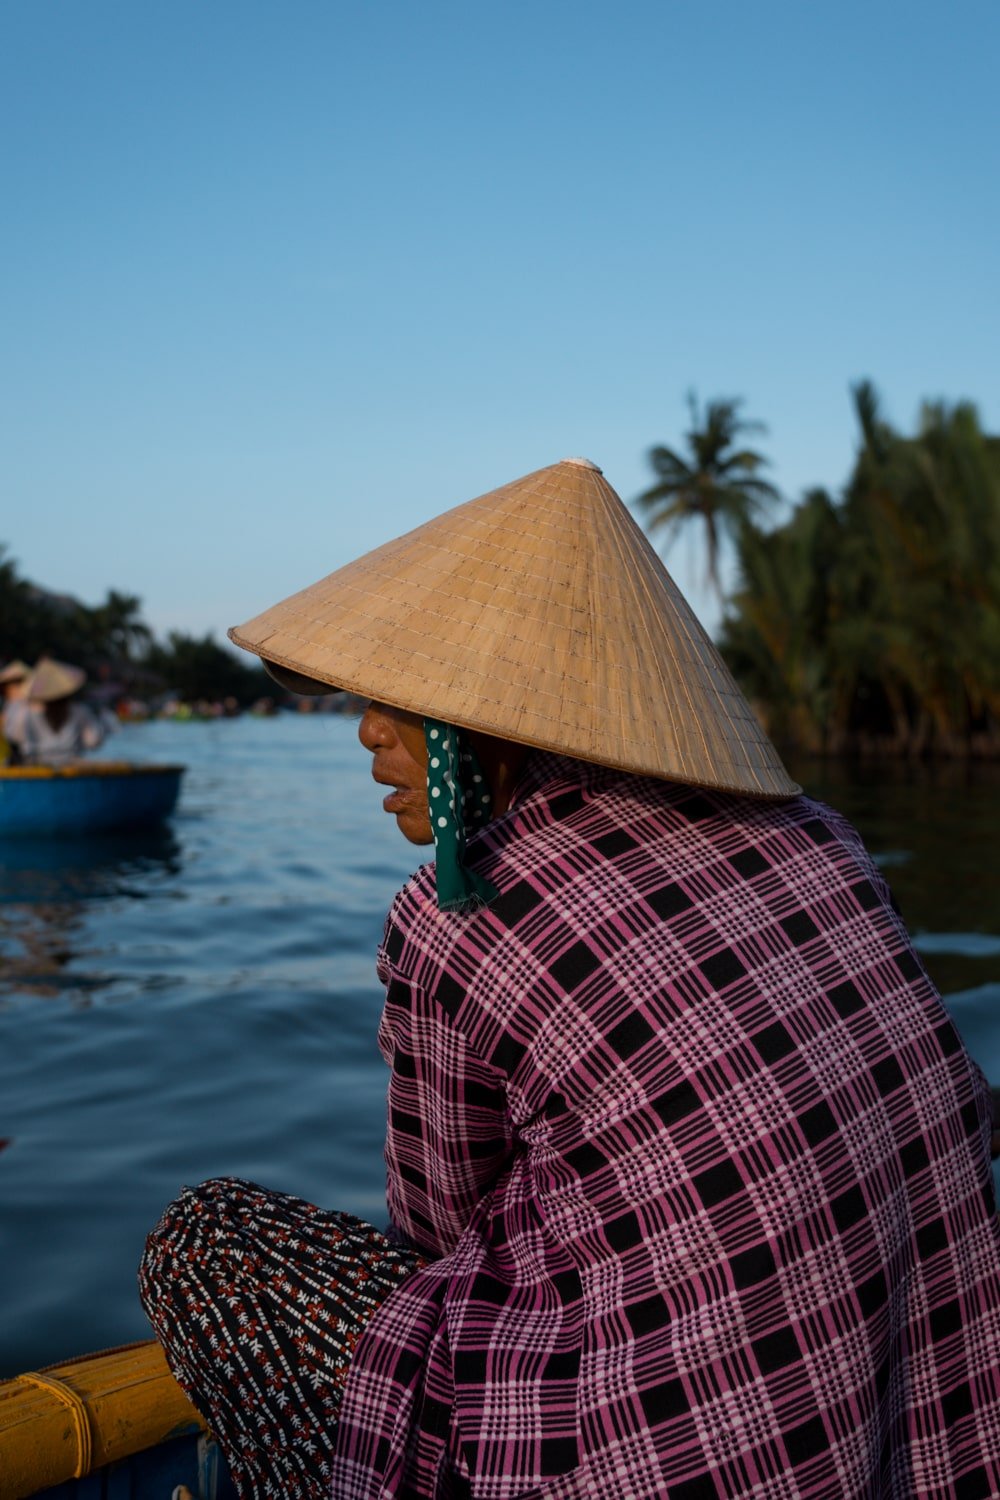 Vietnamese woman wearing a conicle hat and rowing a basket boat near Hoi An, Vietnam.